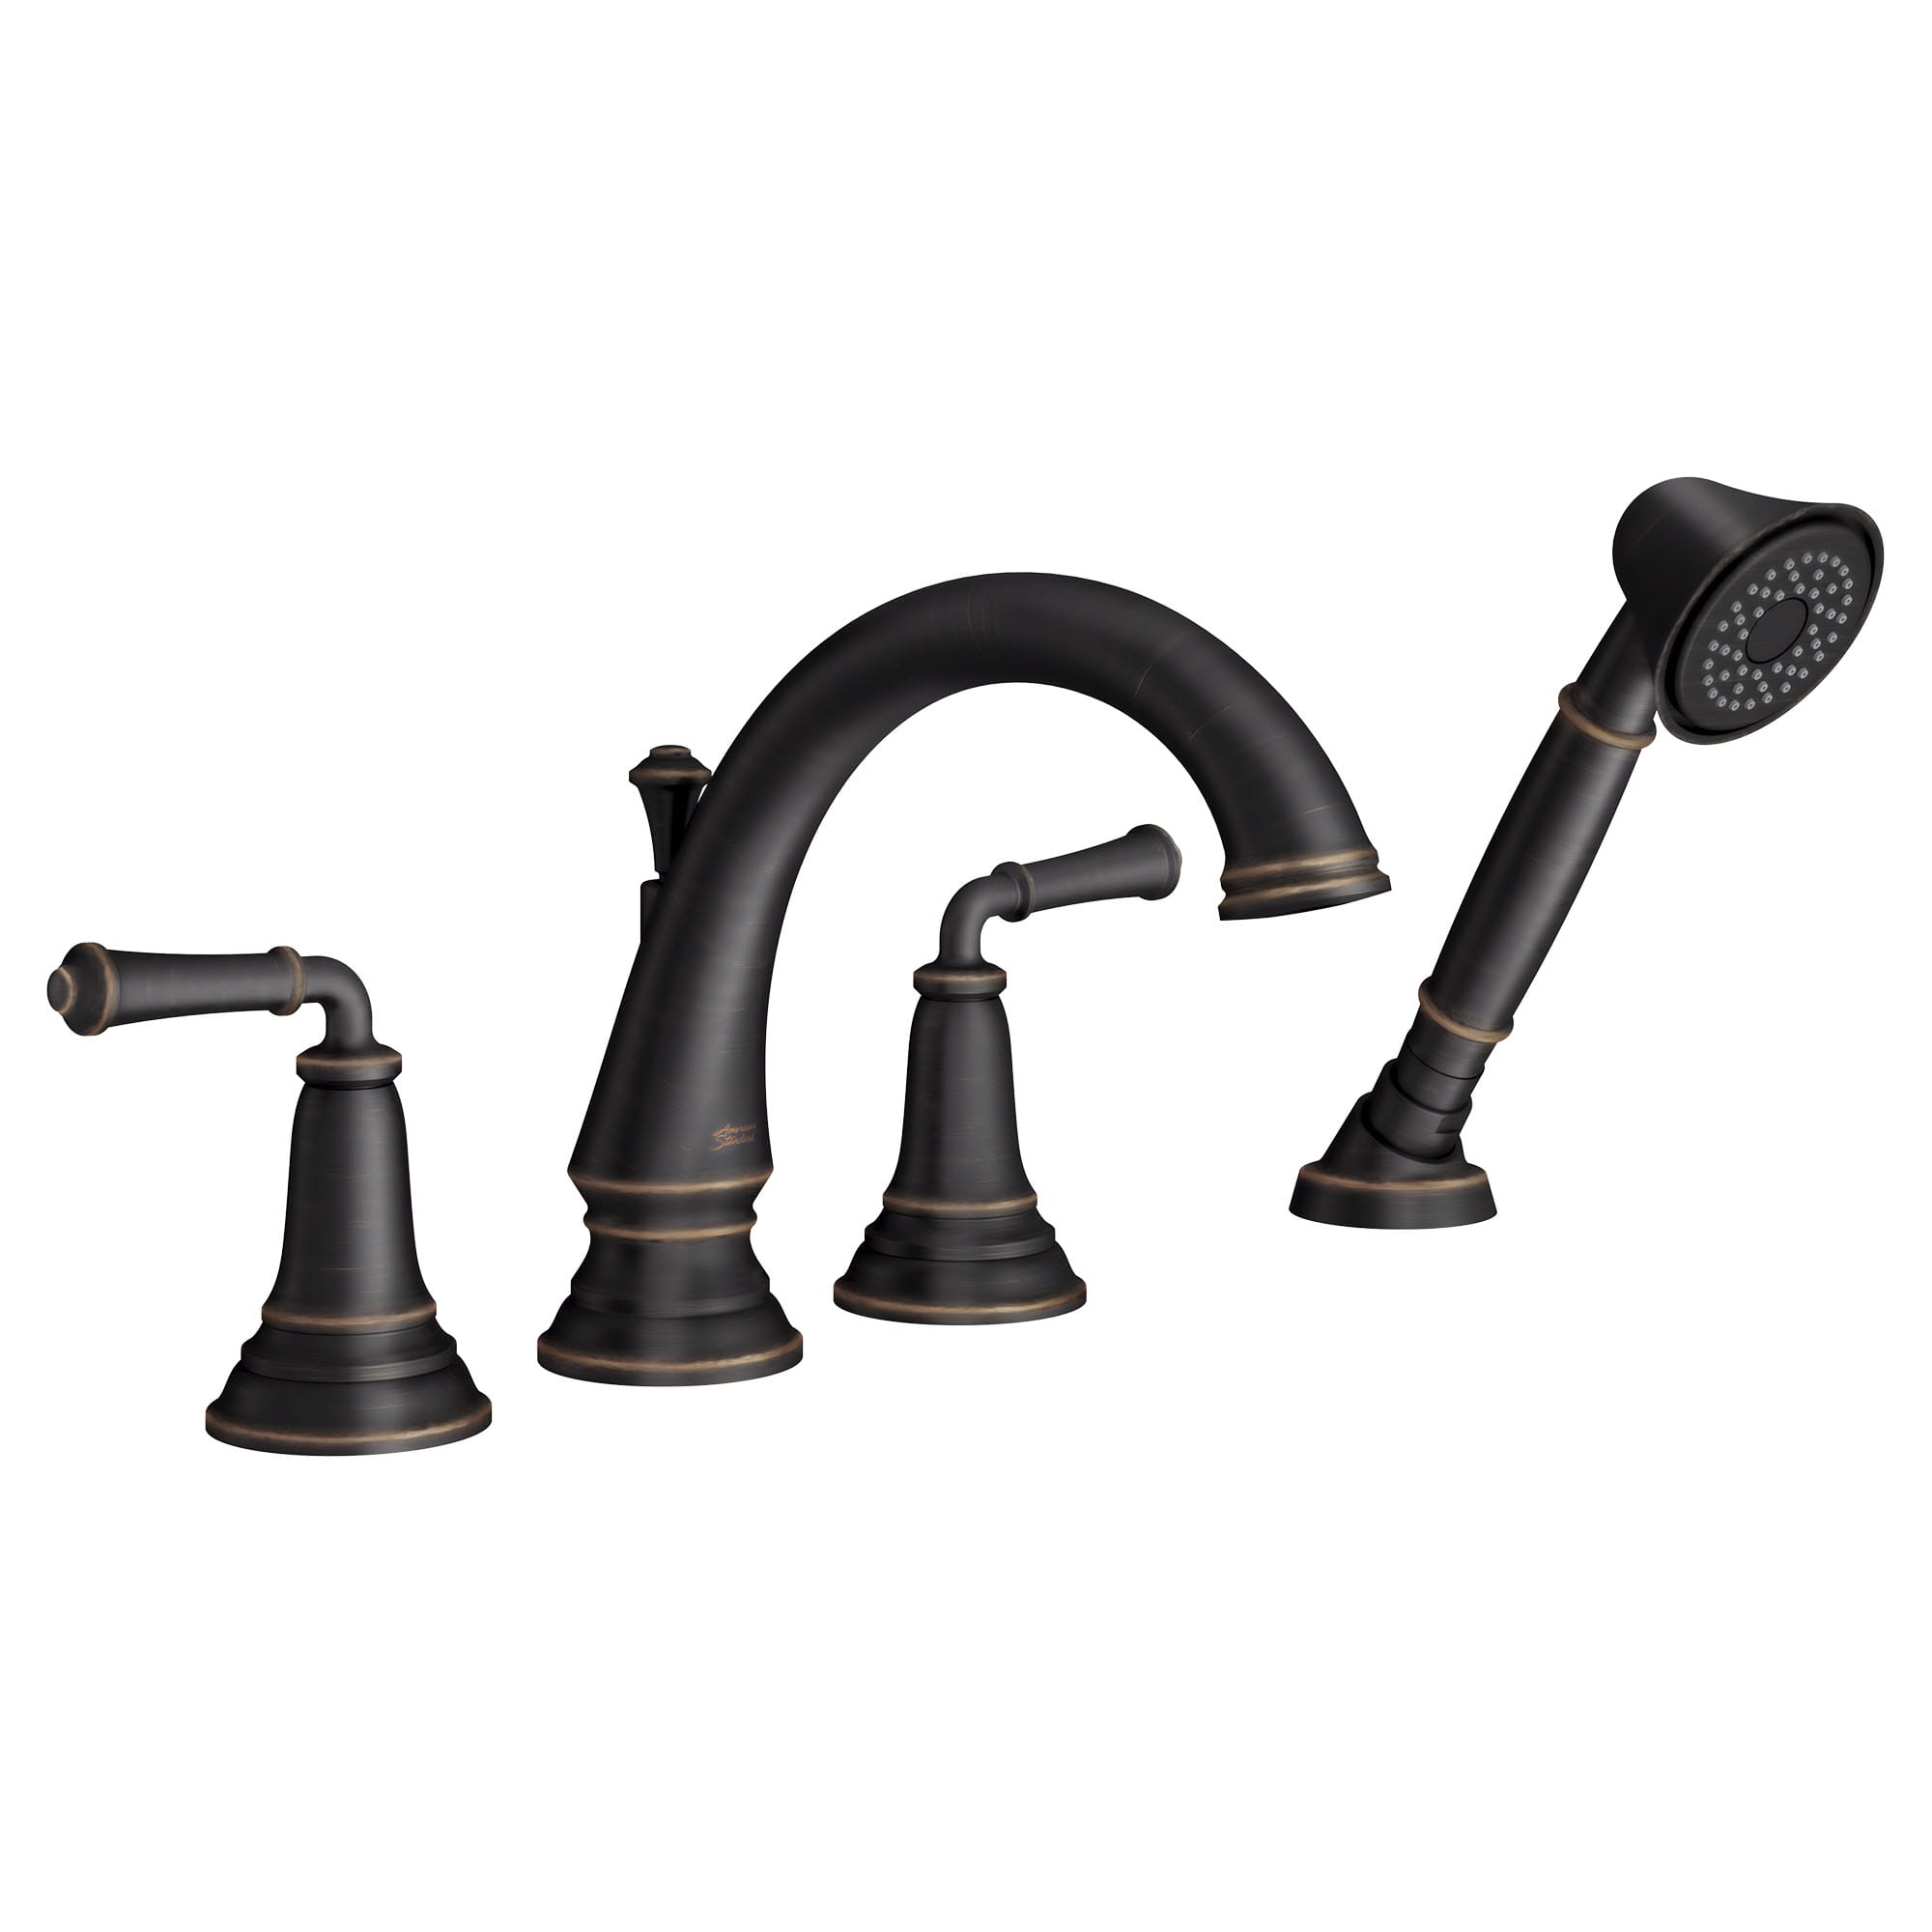 Delancey Bathtub Faucet With  Lever Handles and Personal Shower for Flash Rough In Valve LEGACY BRONZE